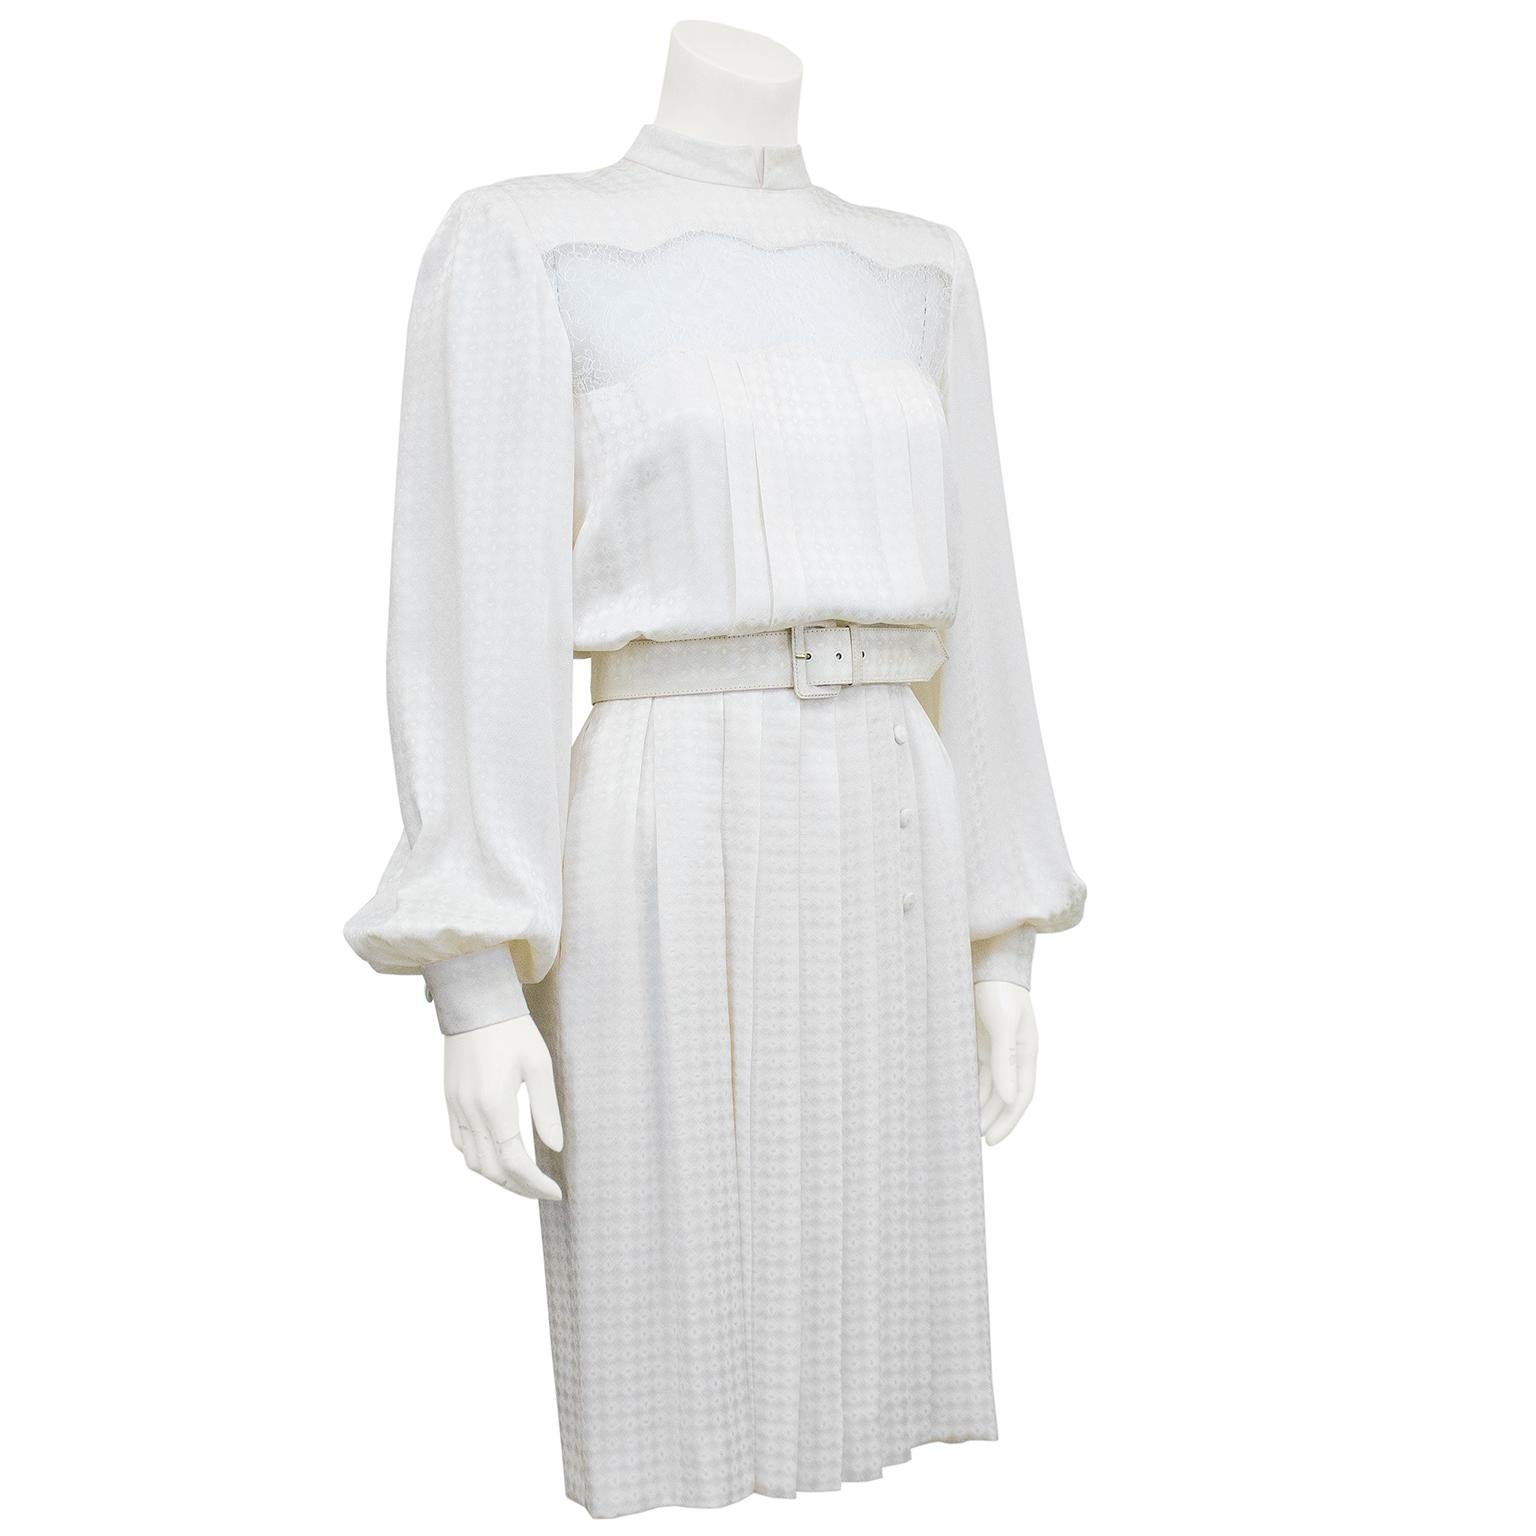 1980s Andre Laug cream silk jacquard dress. Mock turtleneck, oversized bishop sleeves and pleated bodice and skirt. Belted at waist with matching jacquard pattern. White lace cut out detail above the bust and upper back. White lining. Good vintage